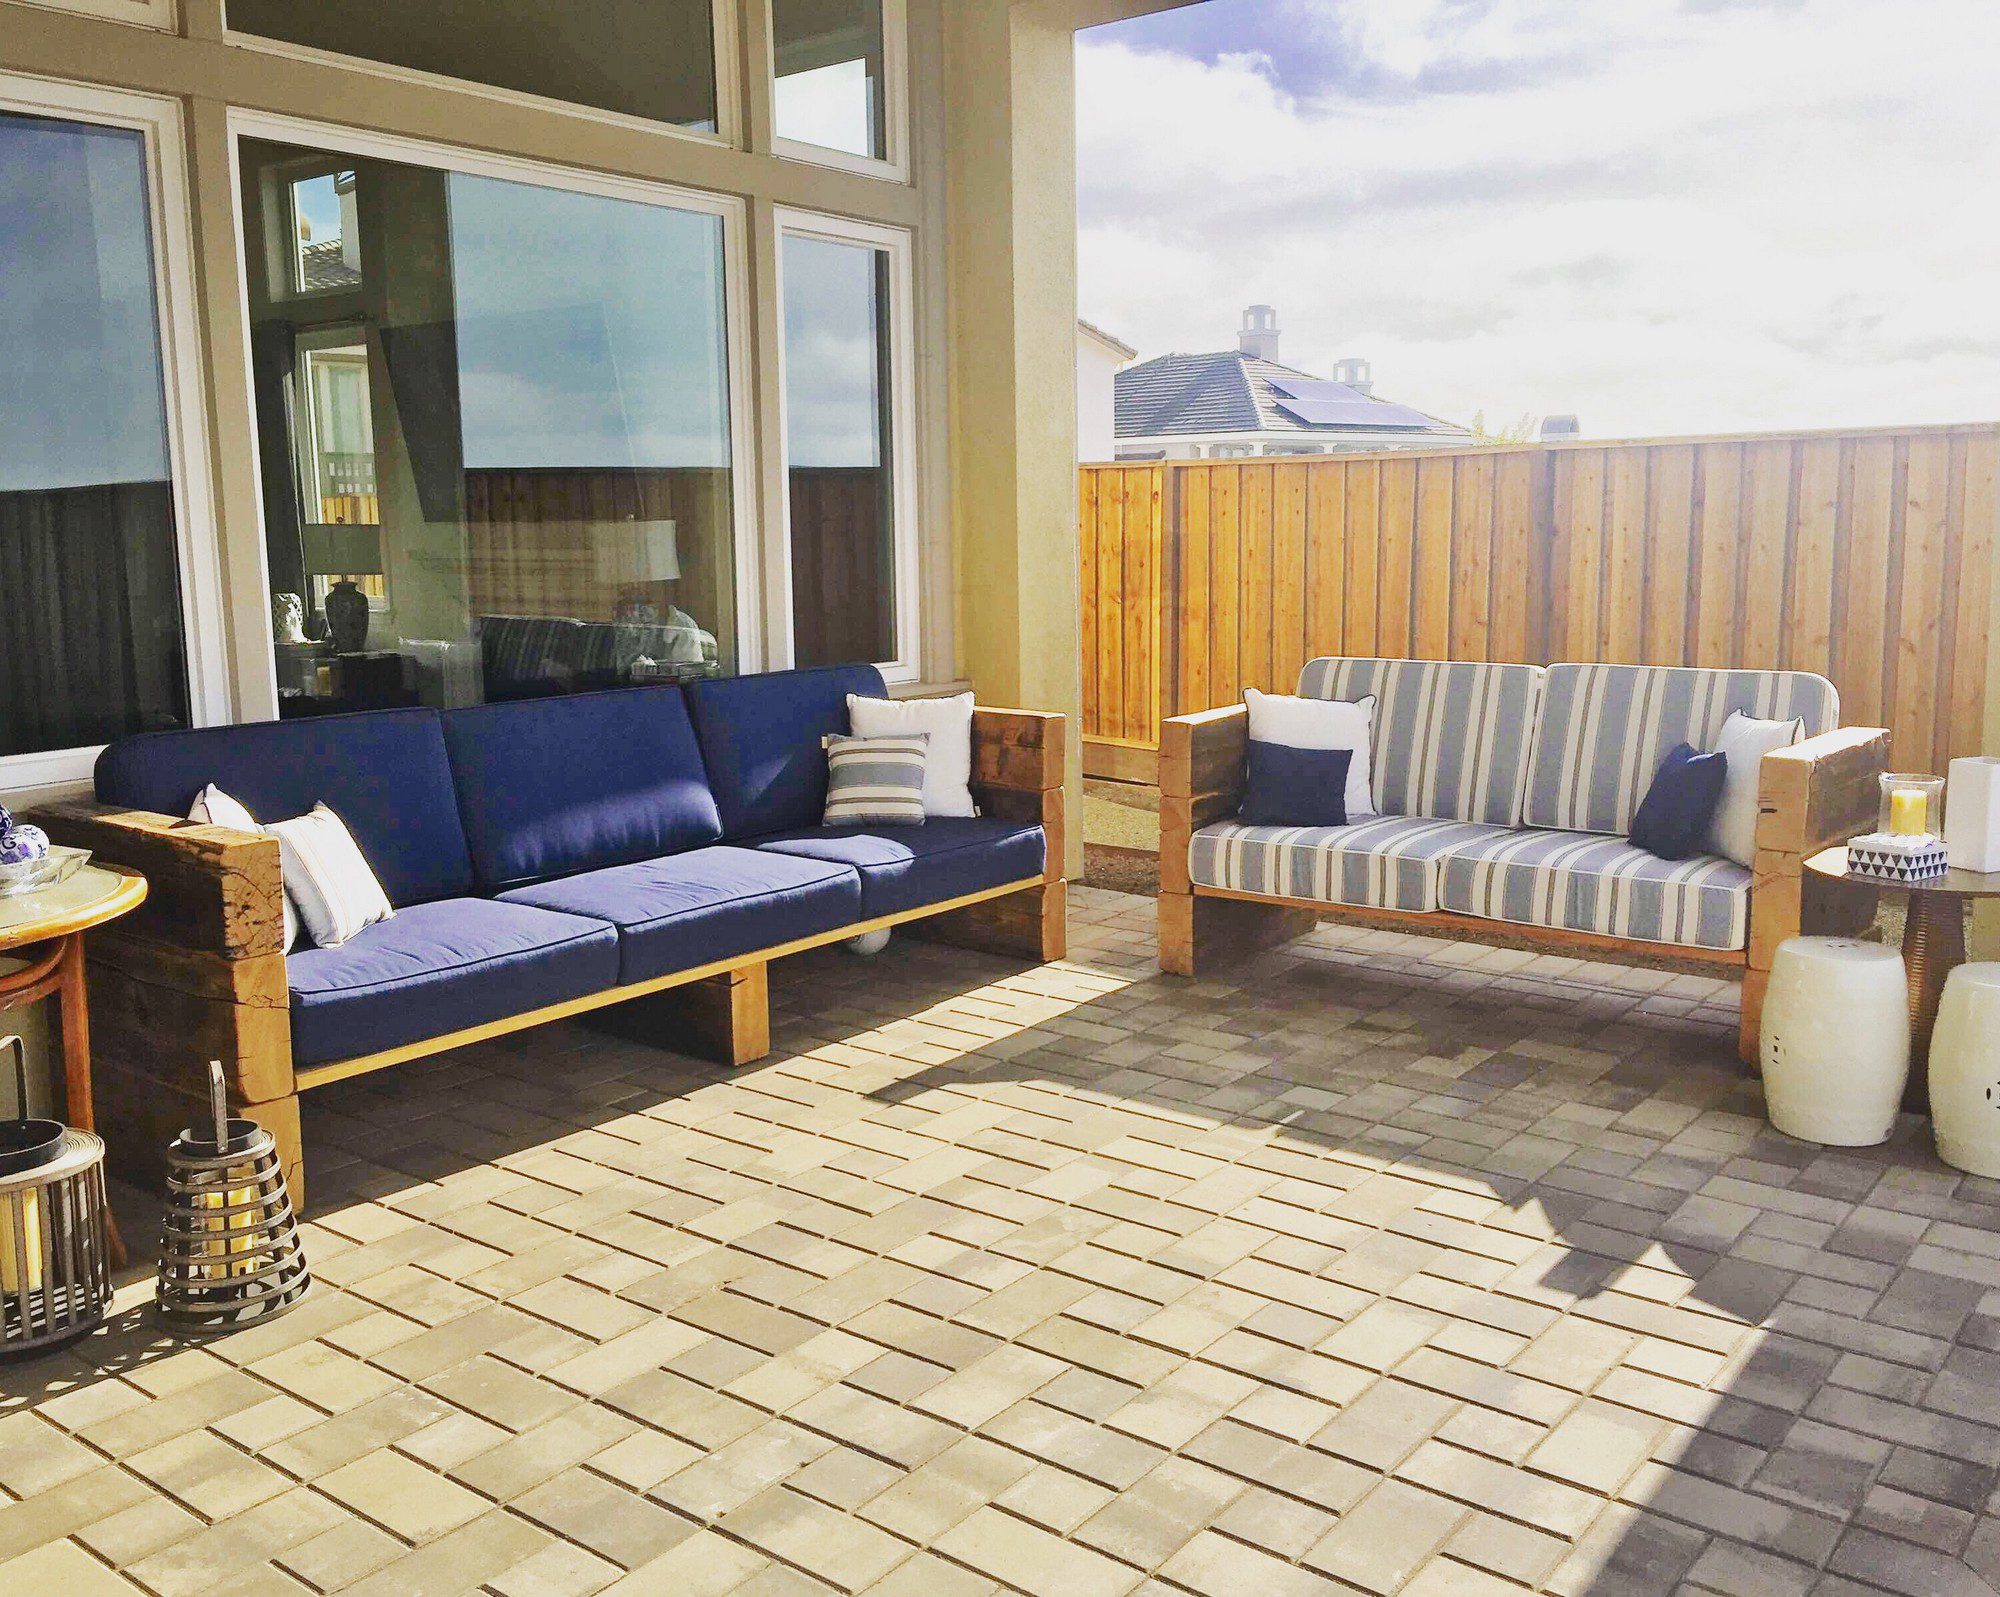 This image shows an outdoor patio with two sofas arranged facing each other, creating a welcoming sitting area. On the left, there's a long sofa with dark blue upholstery and on the right, a smaller sofa with blue and white striped upholstery. Both sofas have throw pillows for added comfort.In between the seating, there are assorted decorative items, including a round table with what seems to be a tray and some small items on it. On the ground, there is a patterned patio flooring with square pavers.To the sides, there are large lanterns and a white stool that might be used as a side table. The background reveals a wooden privacy fence and a view of a building with a shingled roof, hinting that this area is part of a residential neighborhood. The general ambiance is clean, modern, and inviting, ideal for relaxation or social gatherings. The presence of bright sunlight suggests it's a nice day to spend time outside.